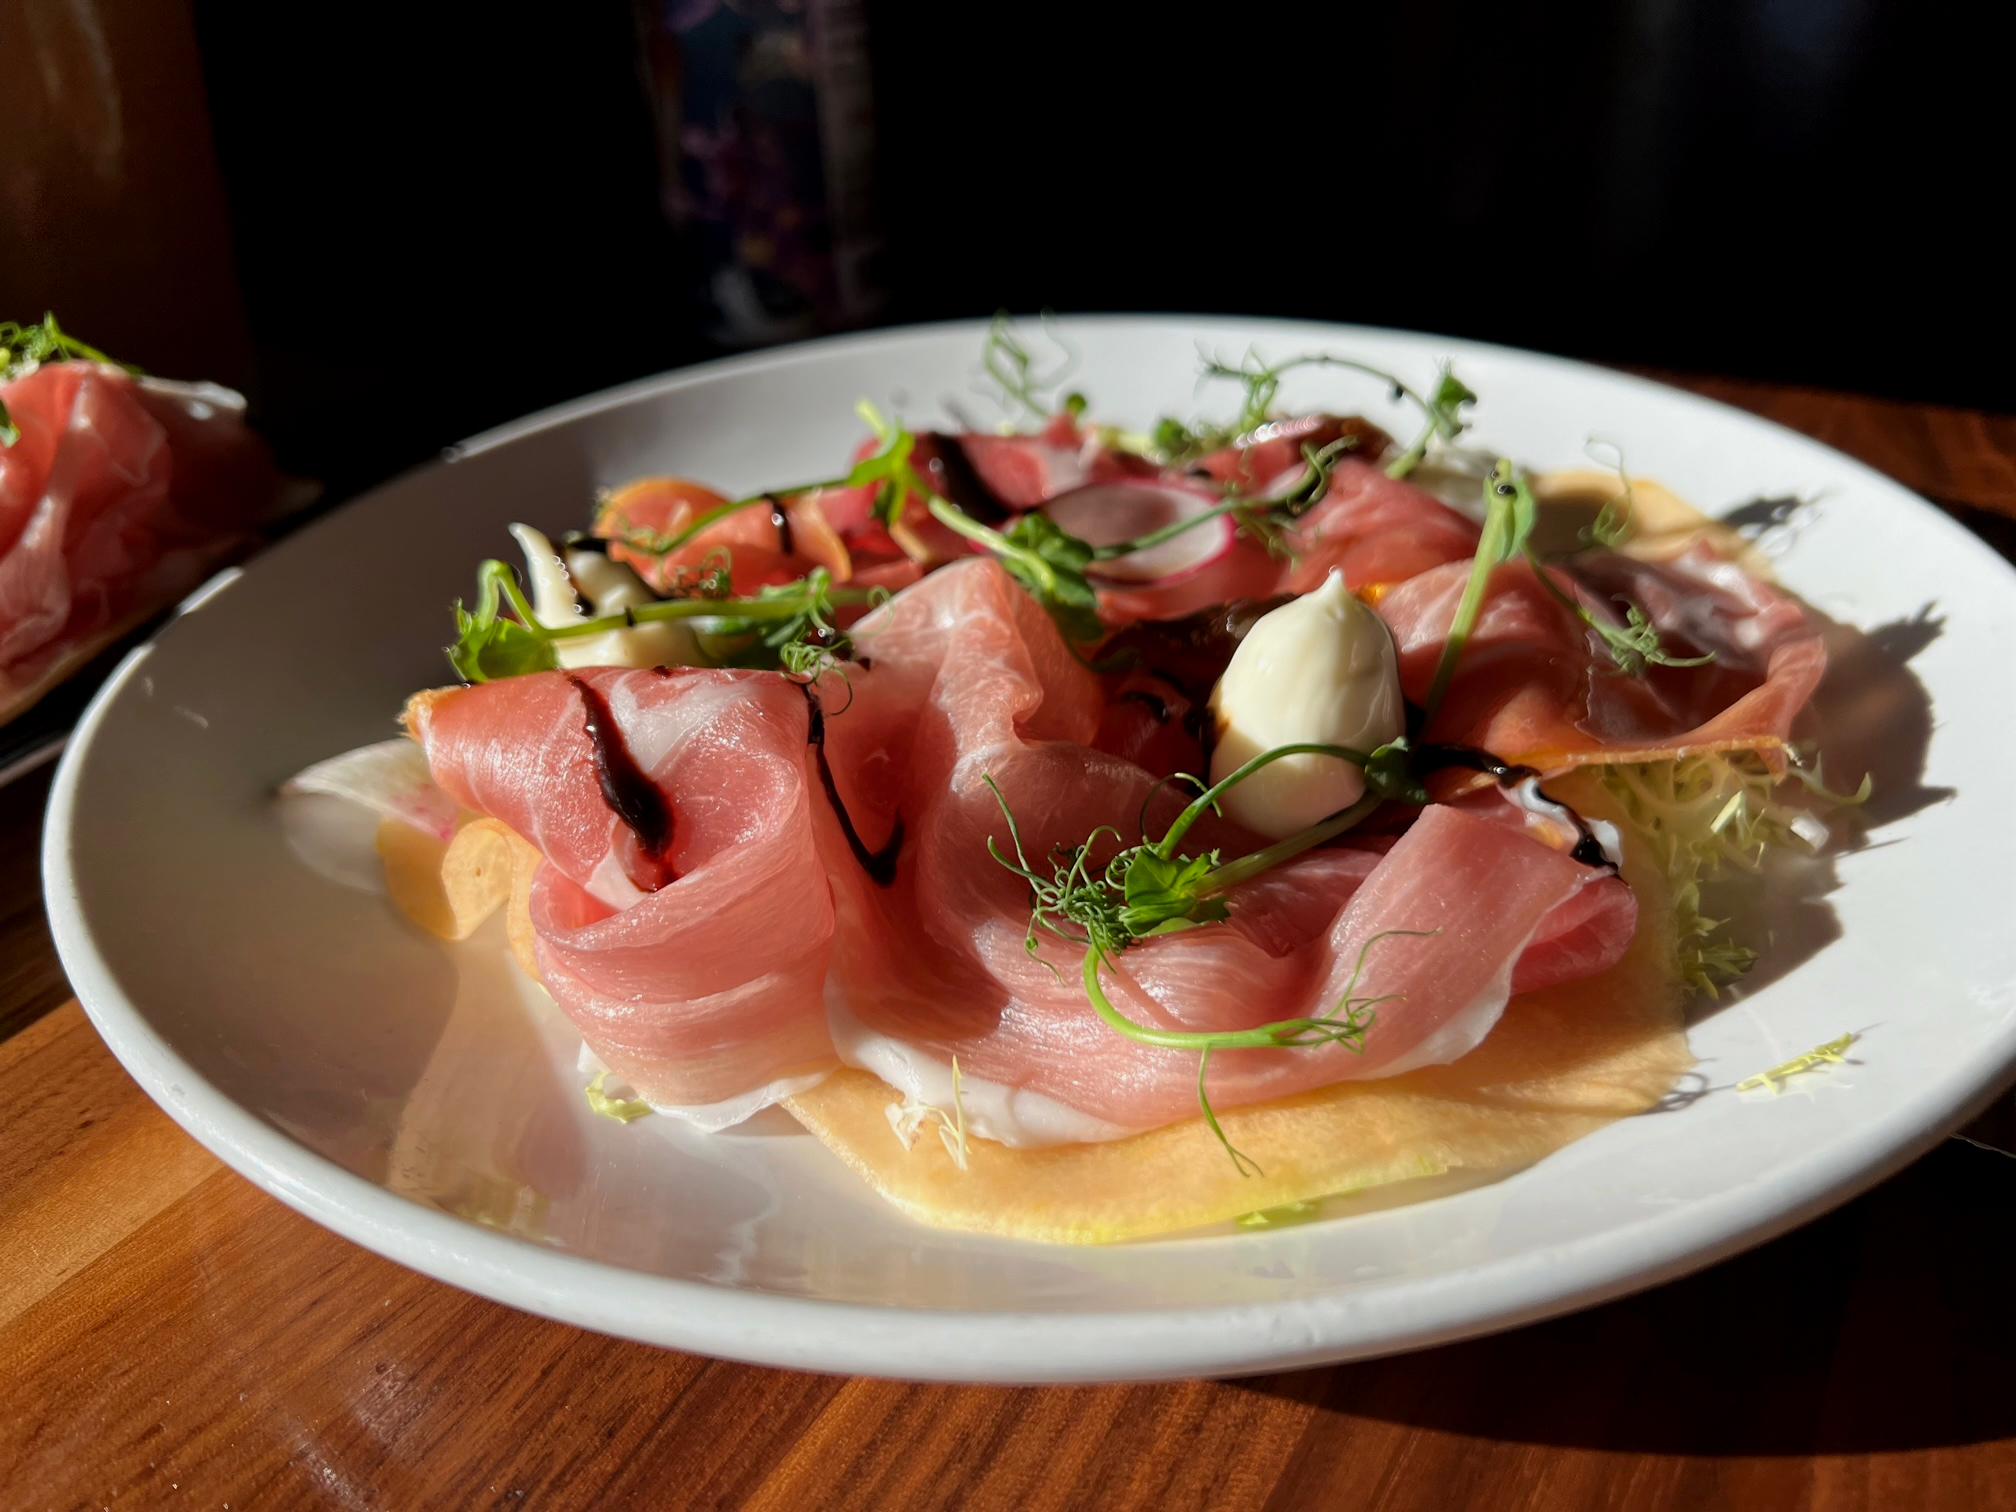 On a white plate, there is proscuitto with cantaloupe, balsamic glaze, white soft cheese, and frisee. Photo by Alyssa Buckley.